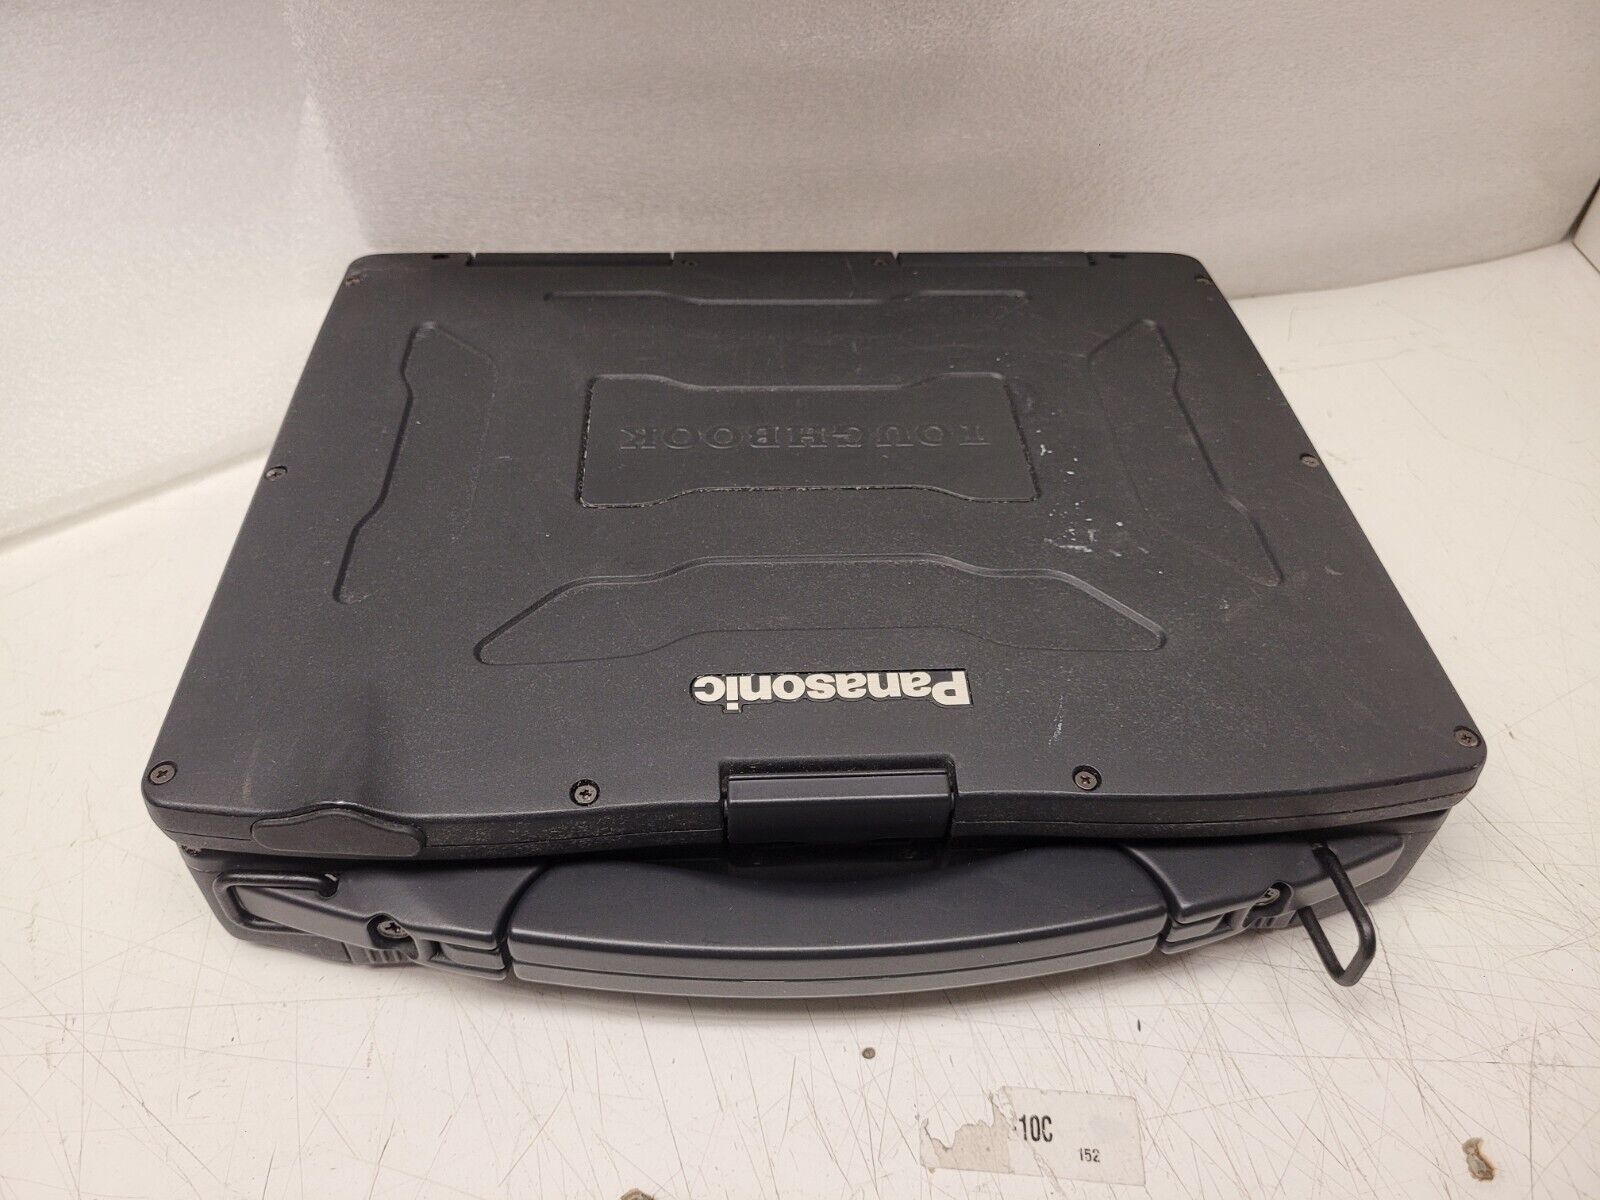 Vintage Panasonic Toughbook CF-27 Laptop Intel P3 @ 500 MHz With A/C adapter